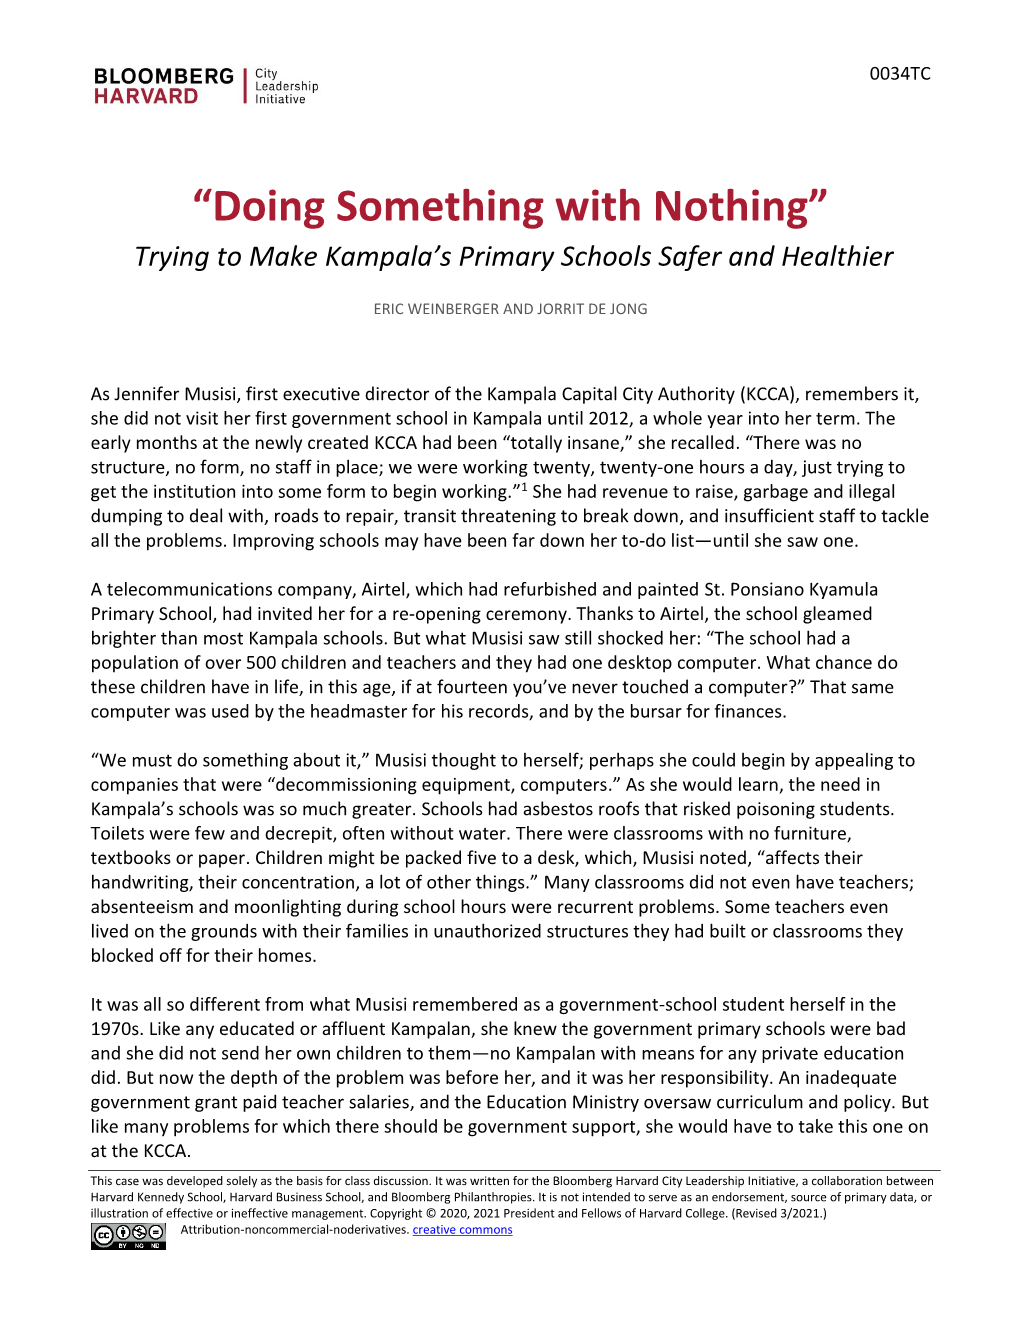 “Doing Something with Nothing”